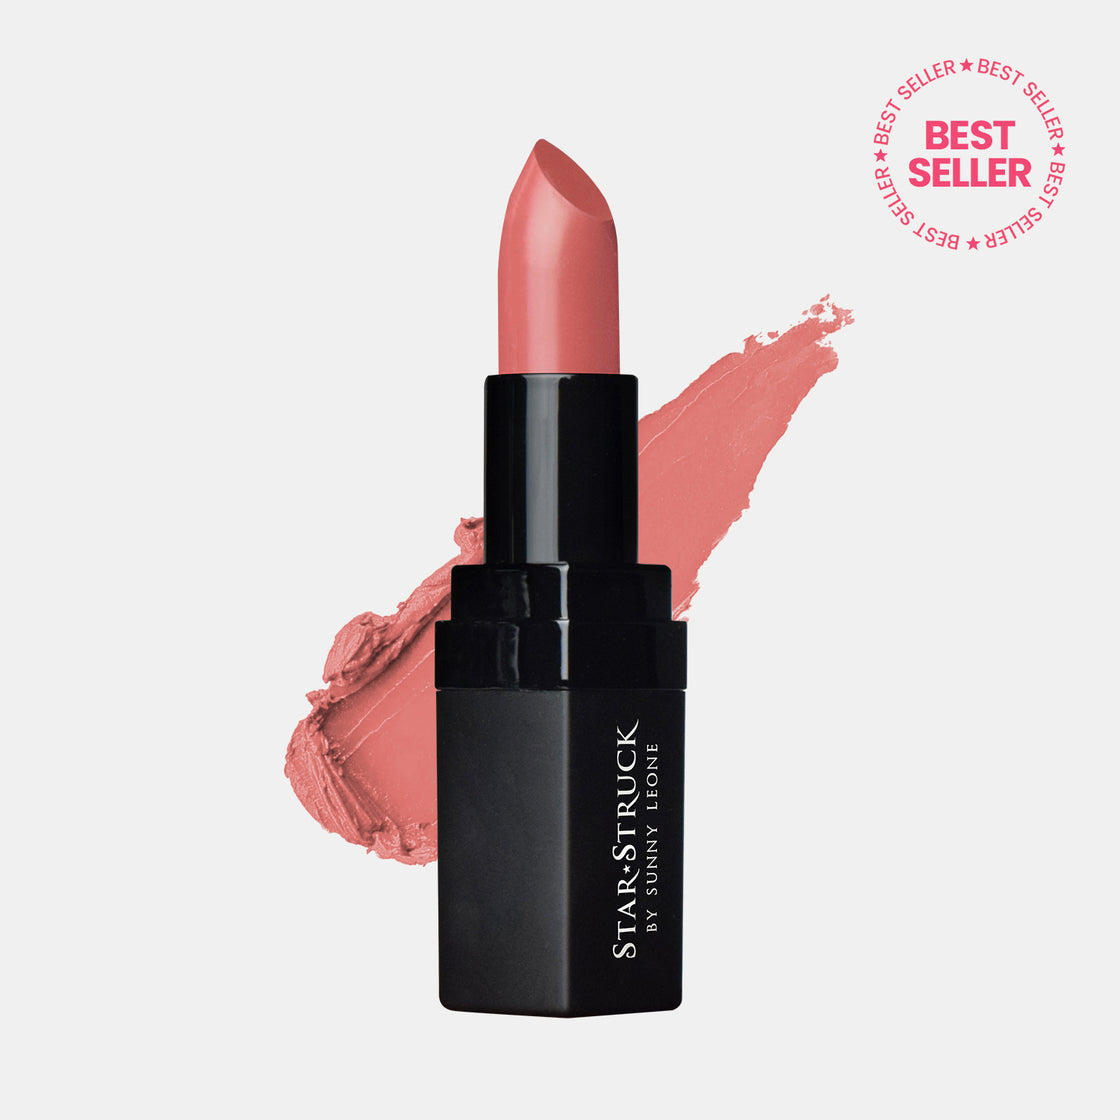 Baby Doll - Luxe Matte Lipstick, Nude Pink | 4.2gms